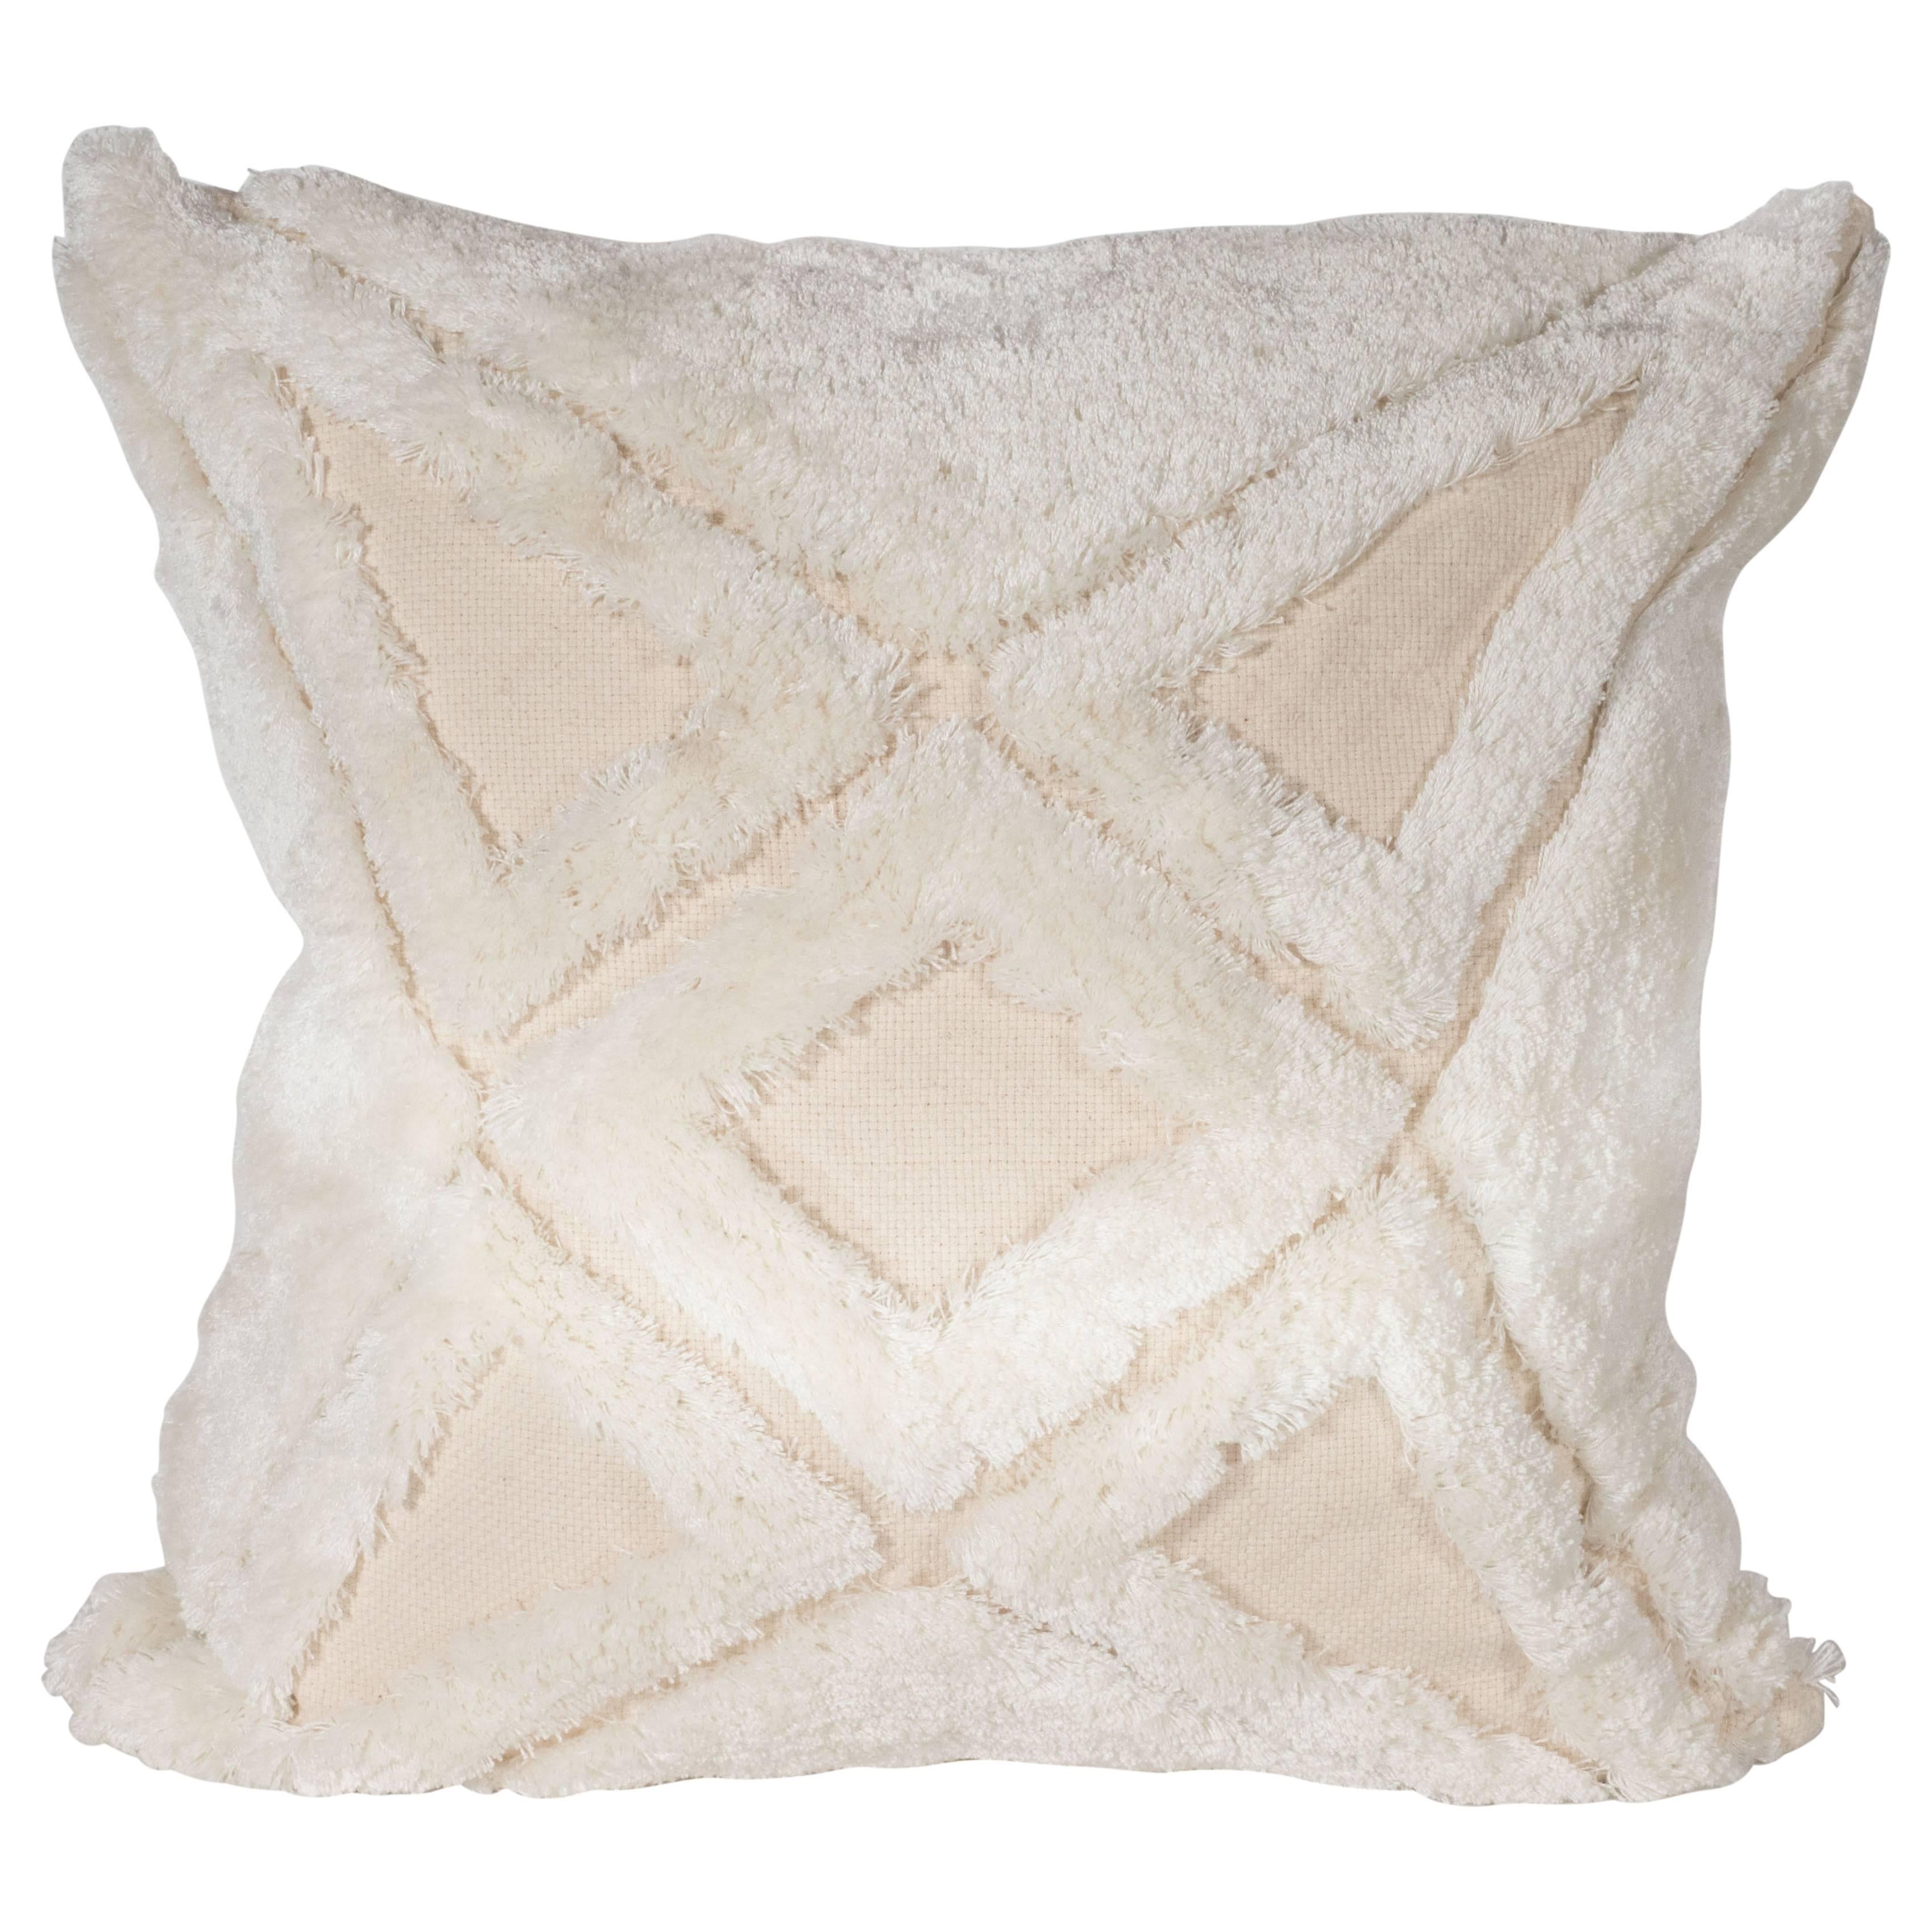 Modernist Textural Cotton Cream Pillow with White Geometric Patterns Throughout